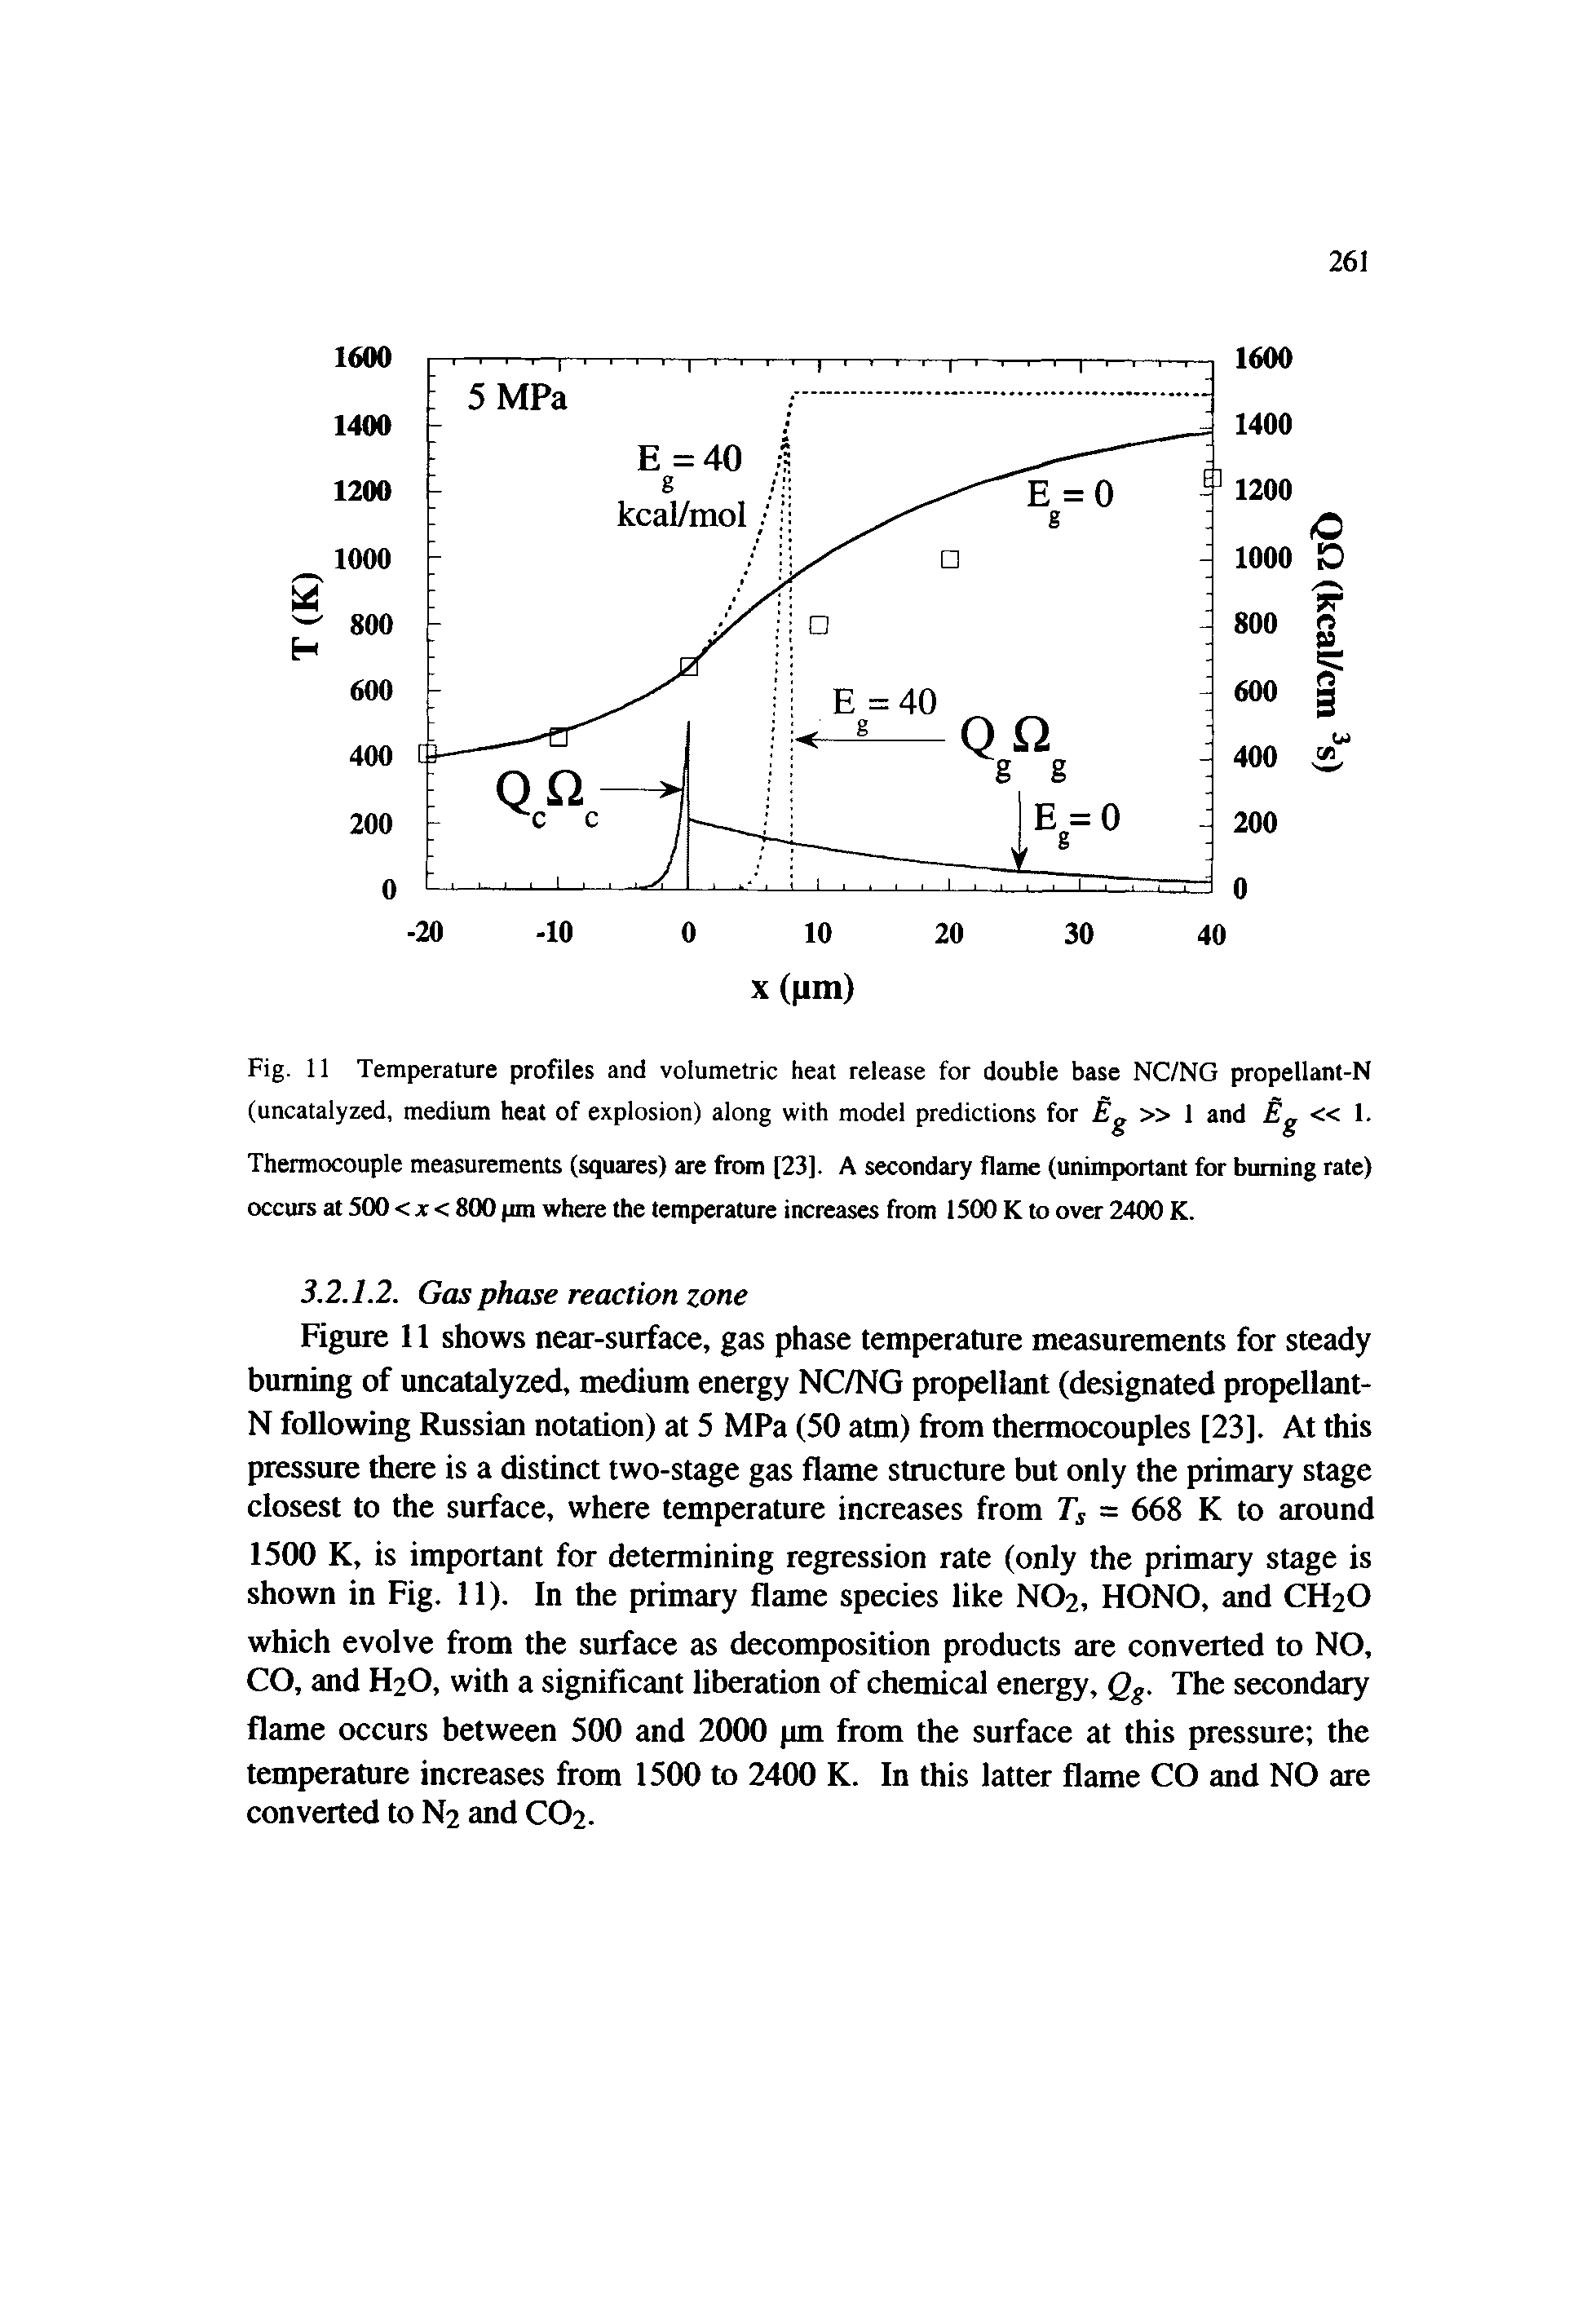 Fig. 11 Temperature profiles and volumetric heat release for double base NC/NG propellant-N (uncatalyzed, medium heat of explosion) along with model predictions for Eg 1 and Eg 1.